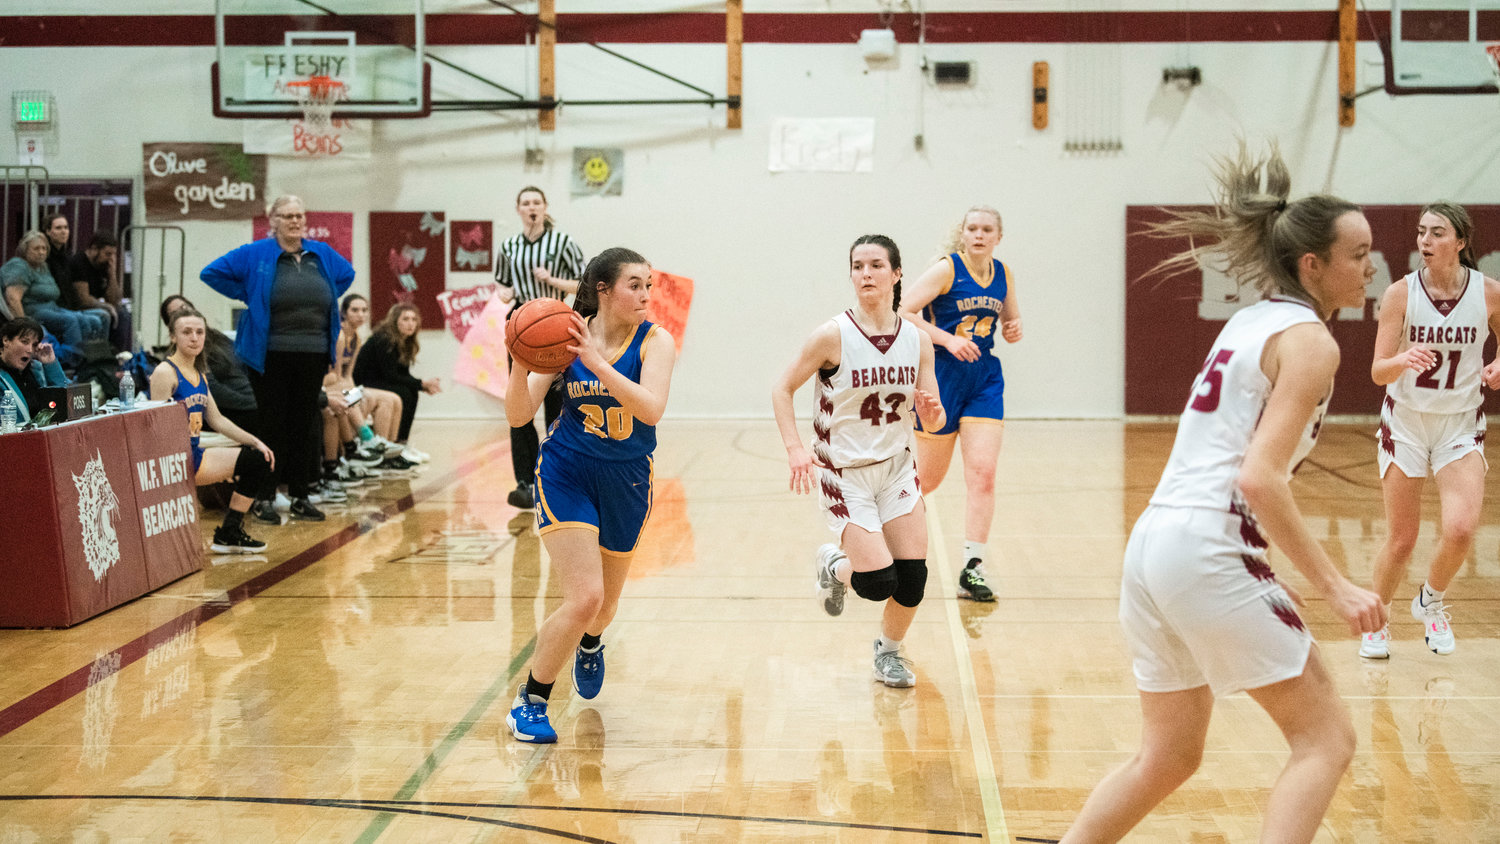 Rochester’s Roisin Stull (30) looks to pass during a game against W.F. West in Chehalis on Jan. 5.